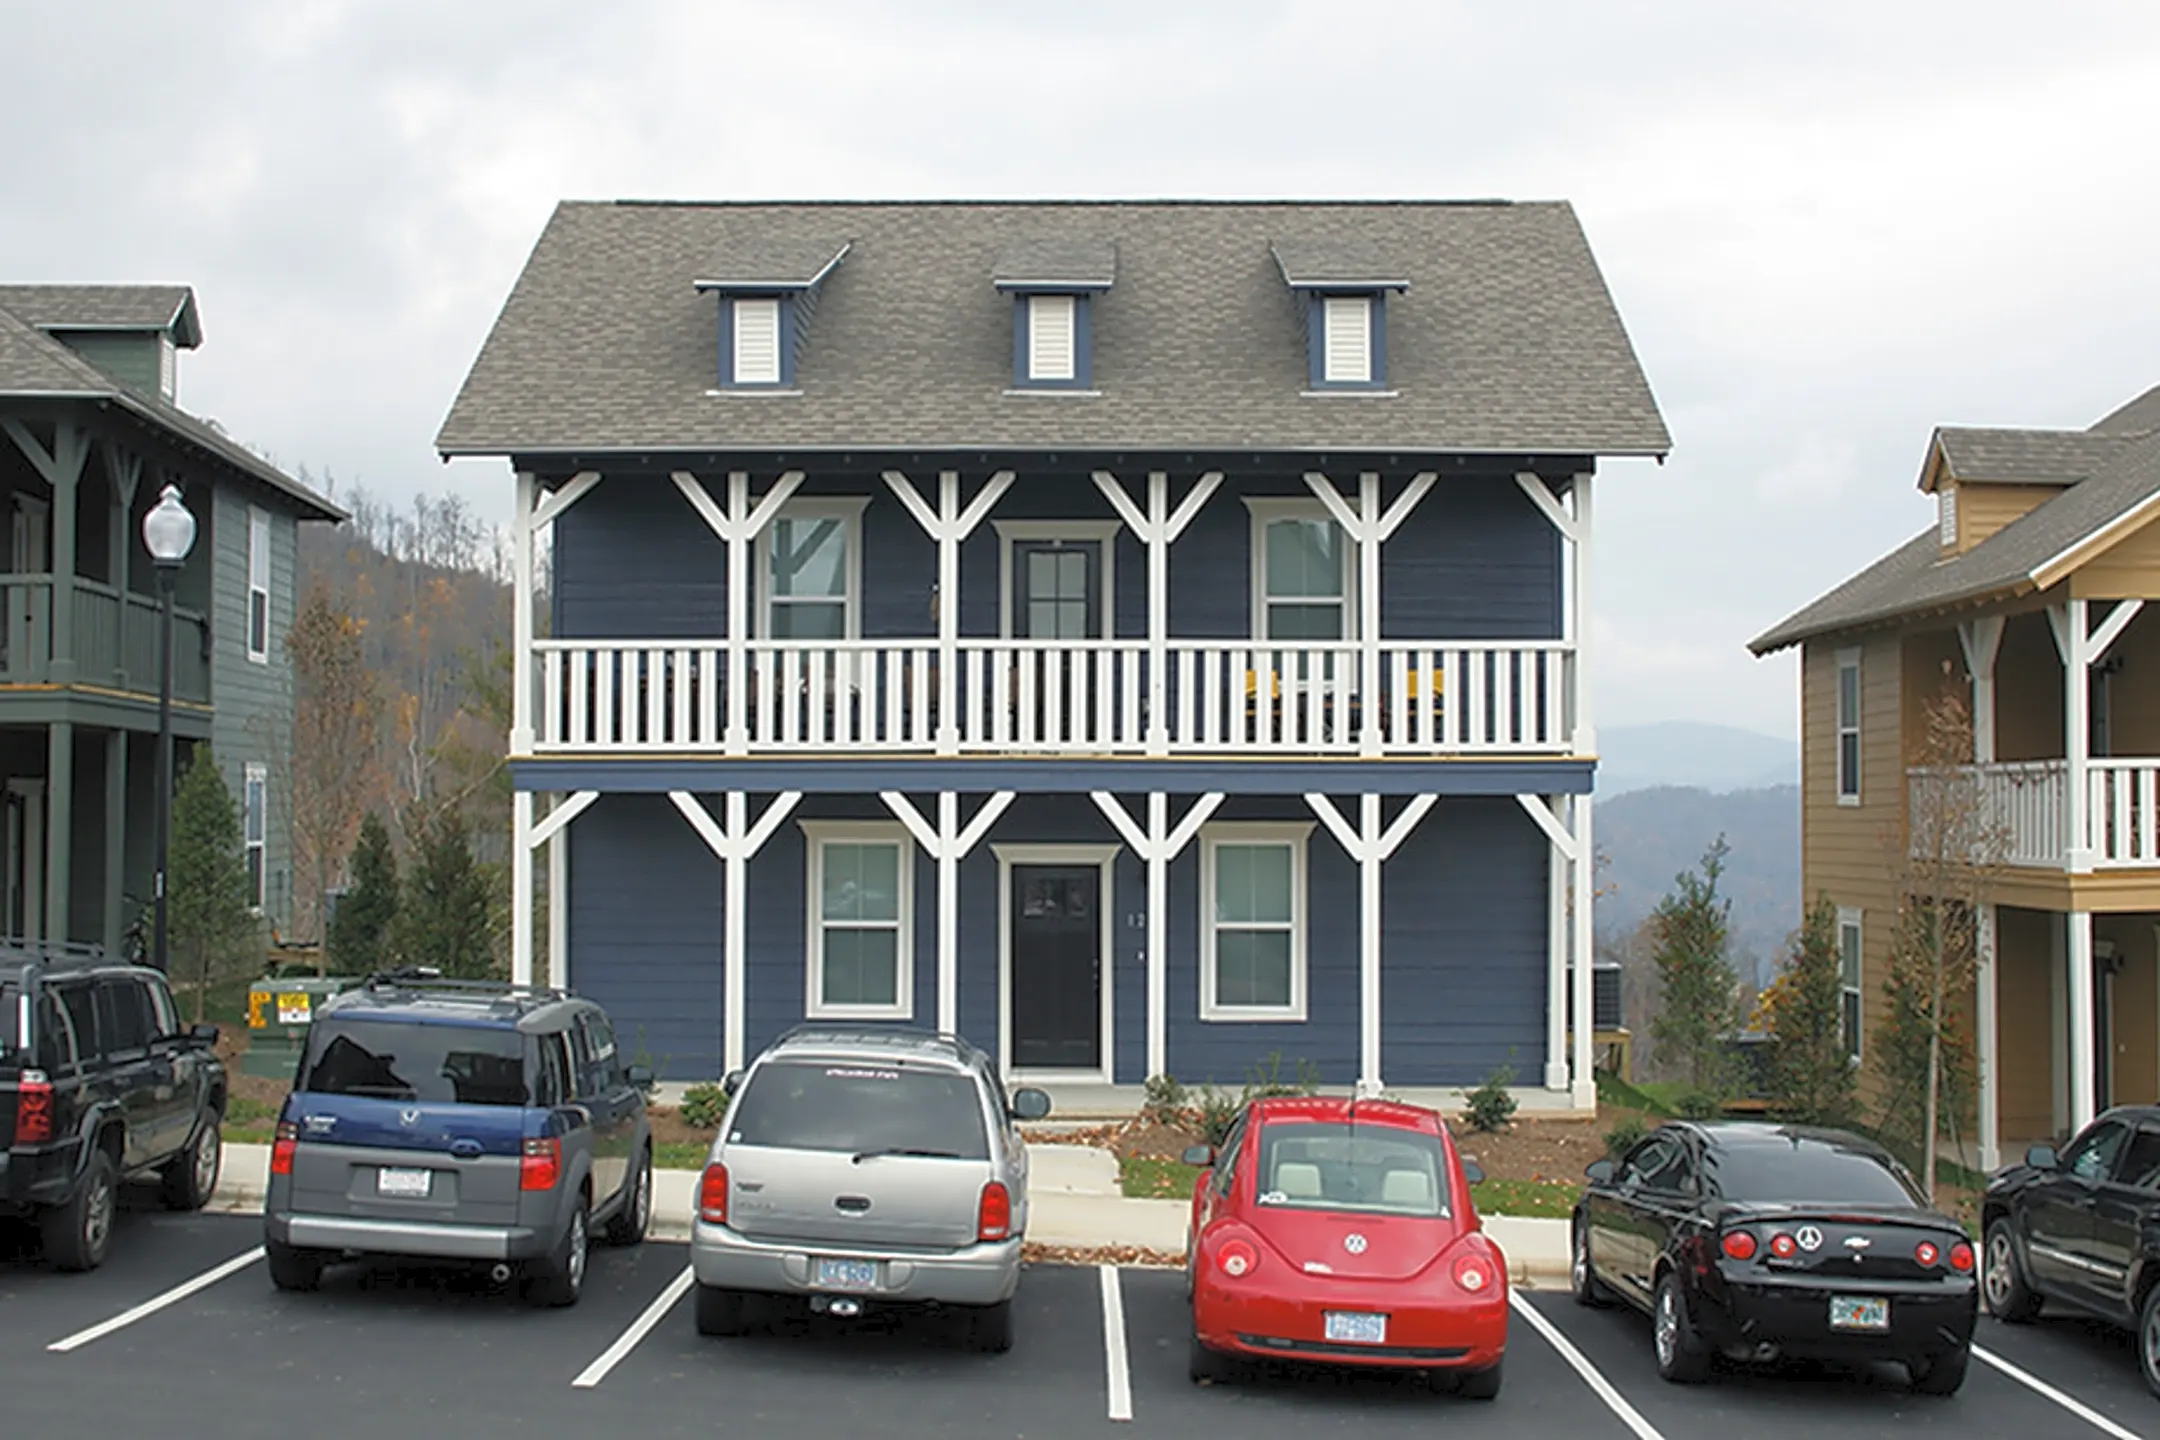 Building - The Cottages of Boone - Per Bed Lease - Boone, NC